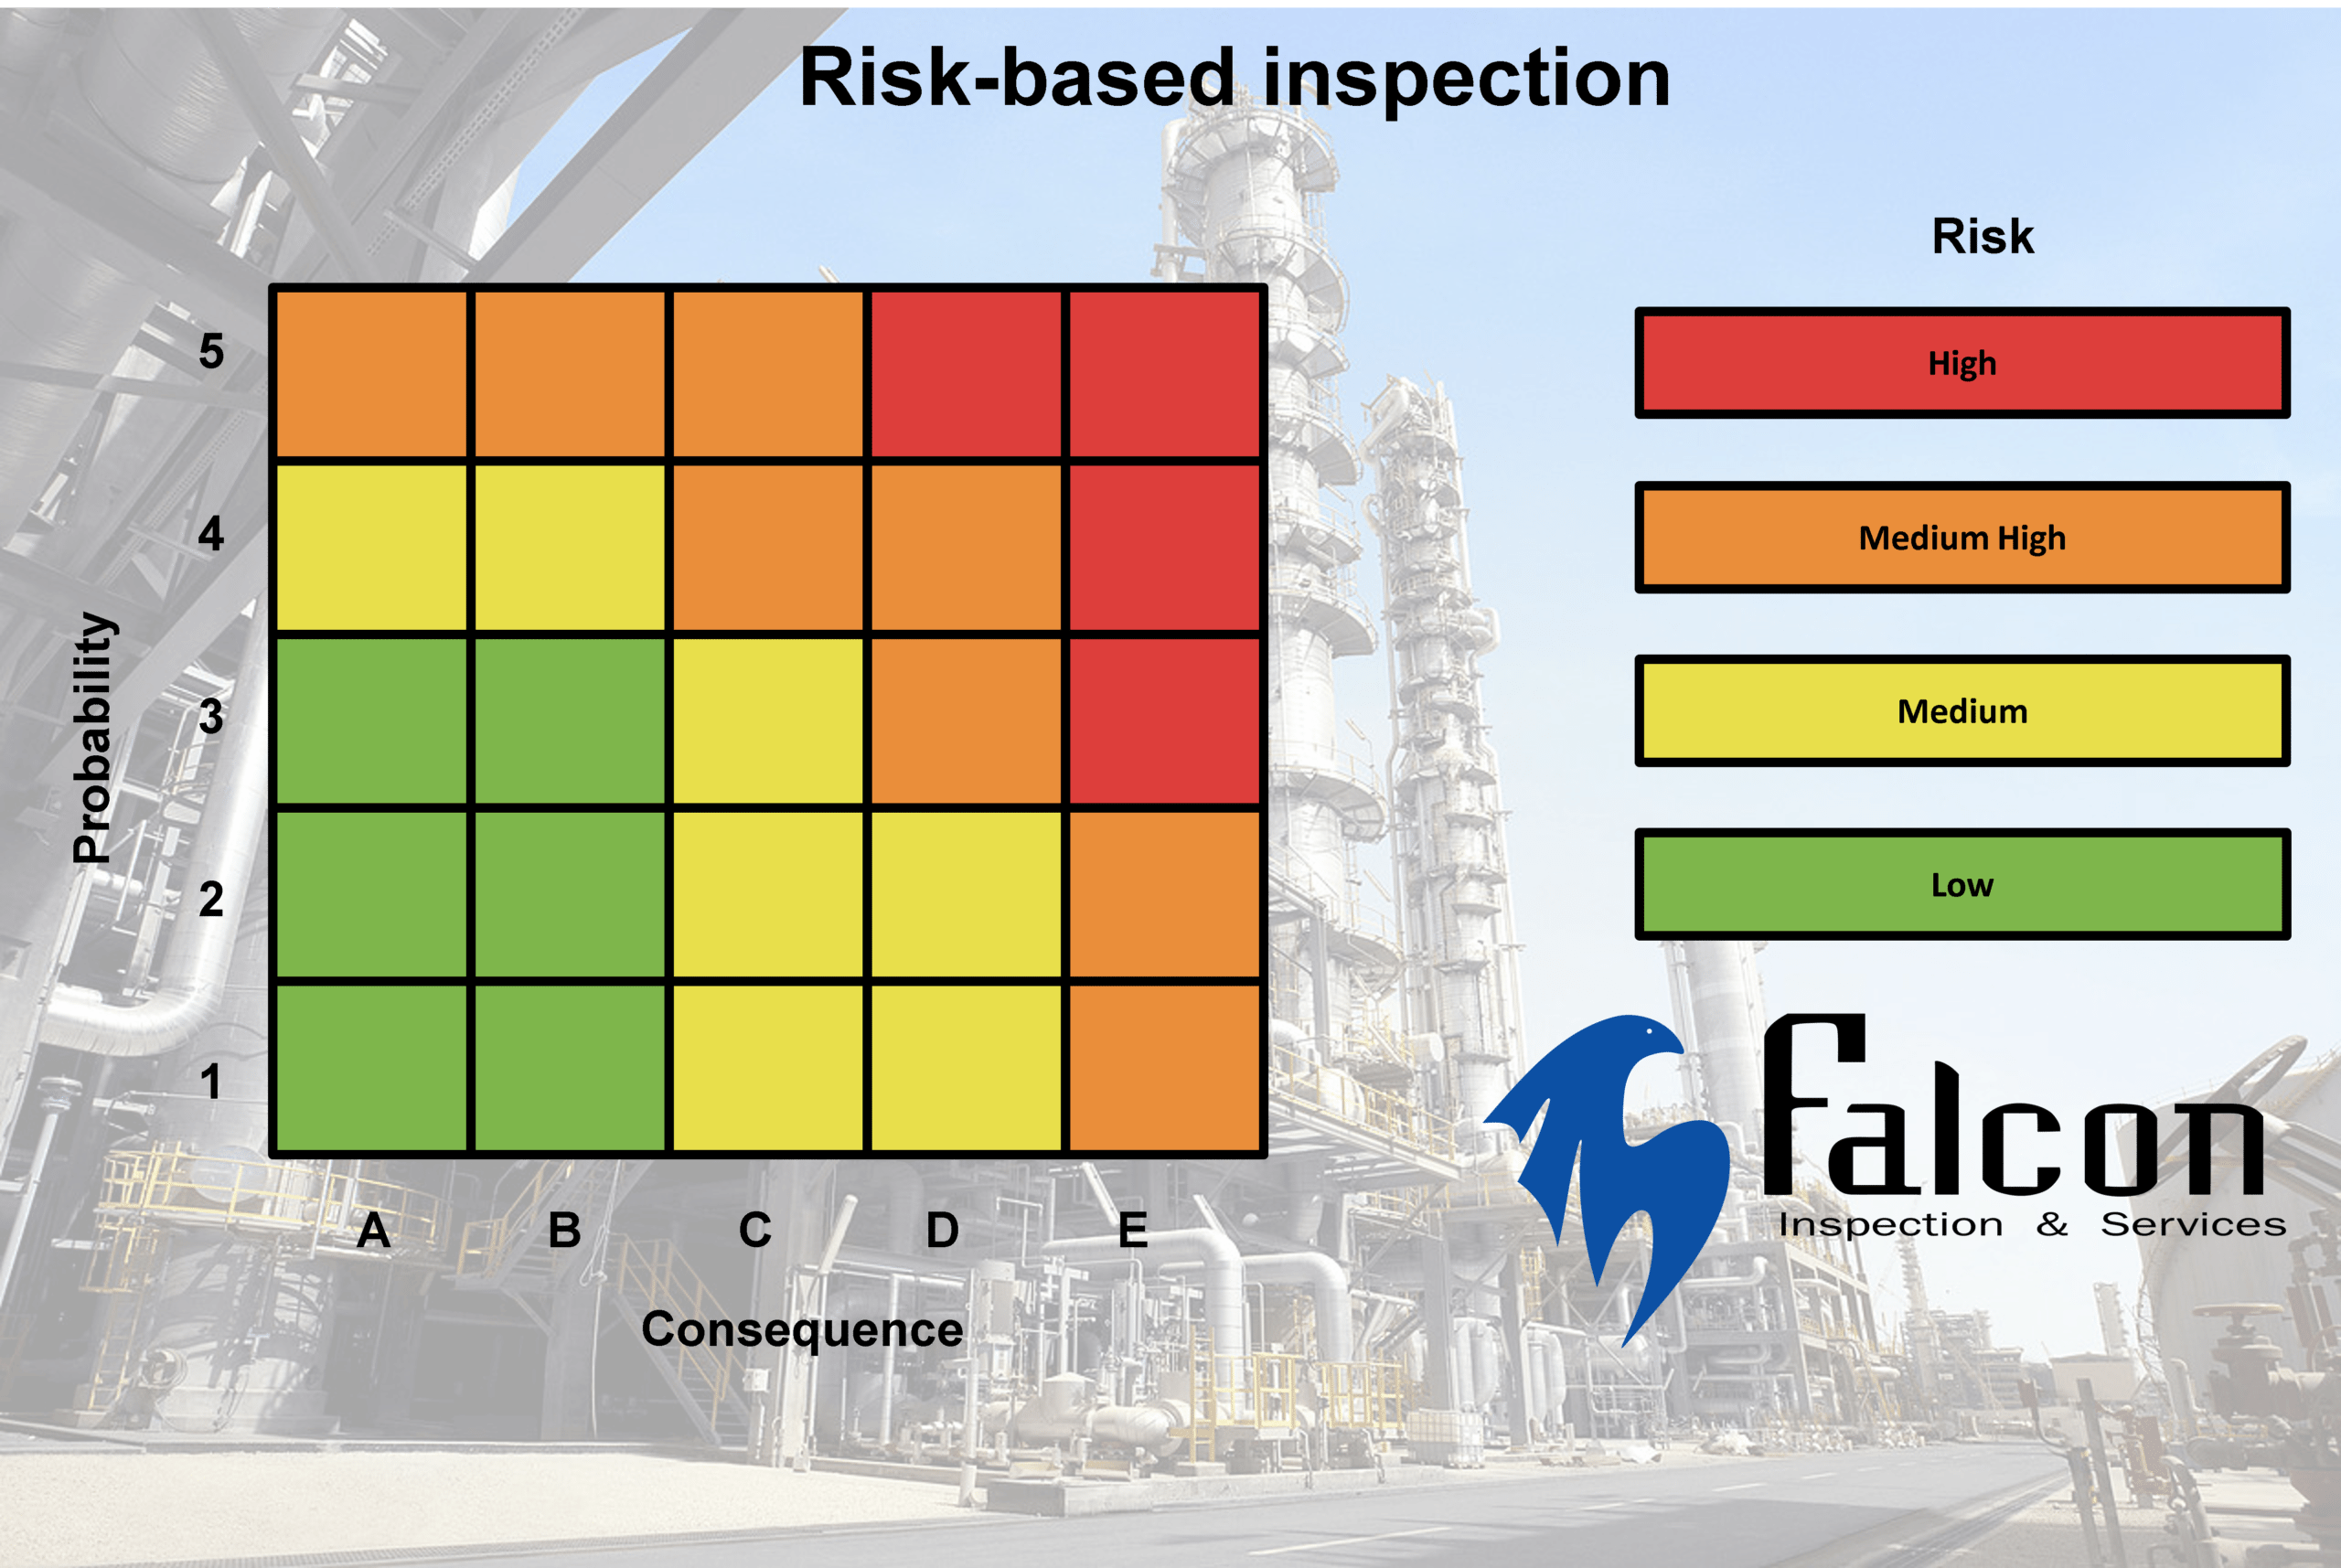 rbi risk based inspection tunisia canada quebec africa inspection falcon